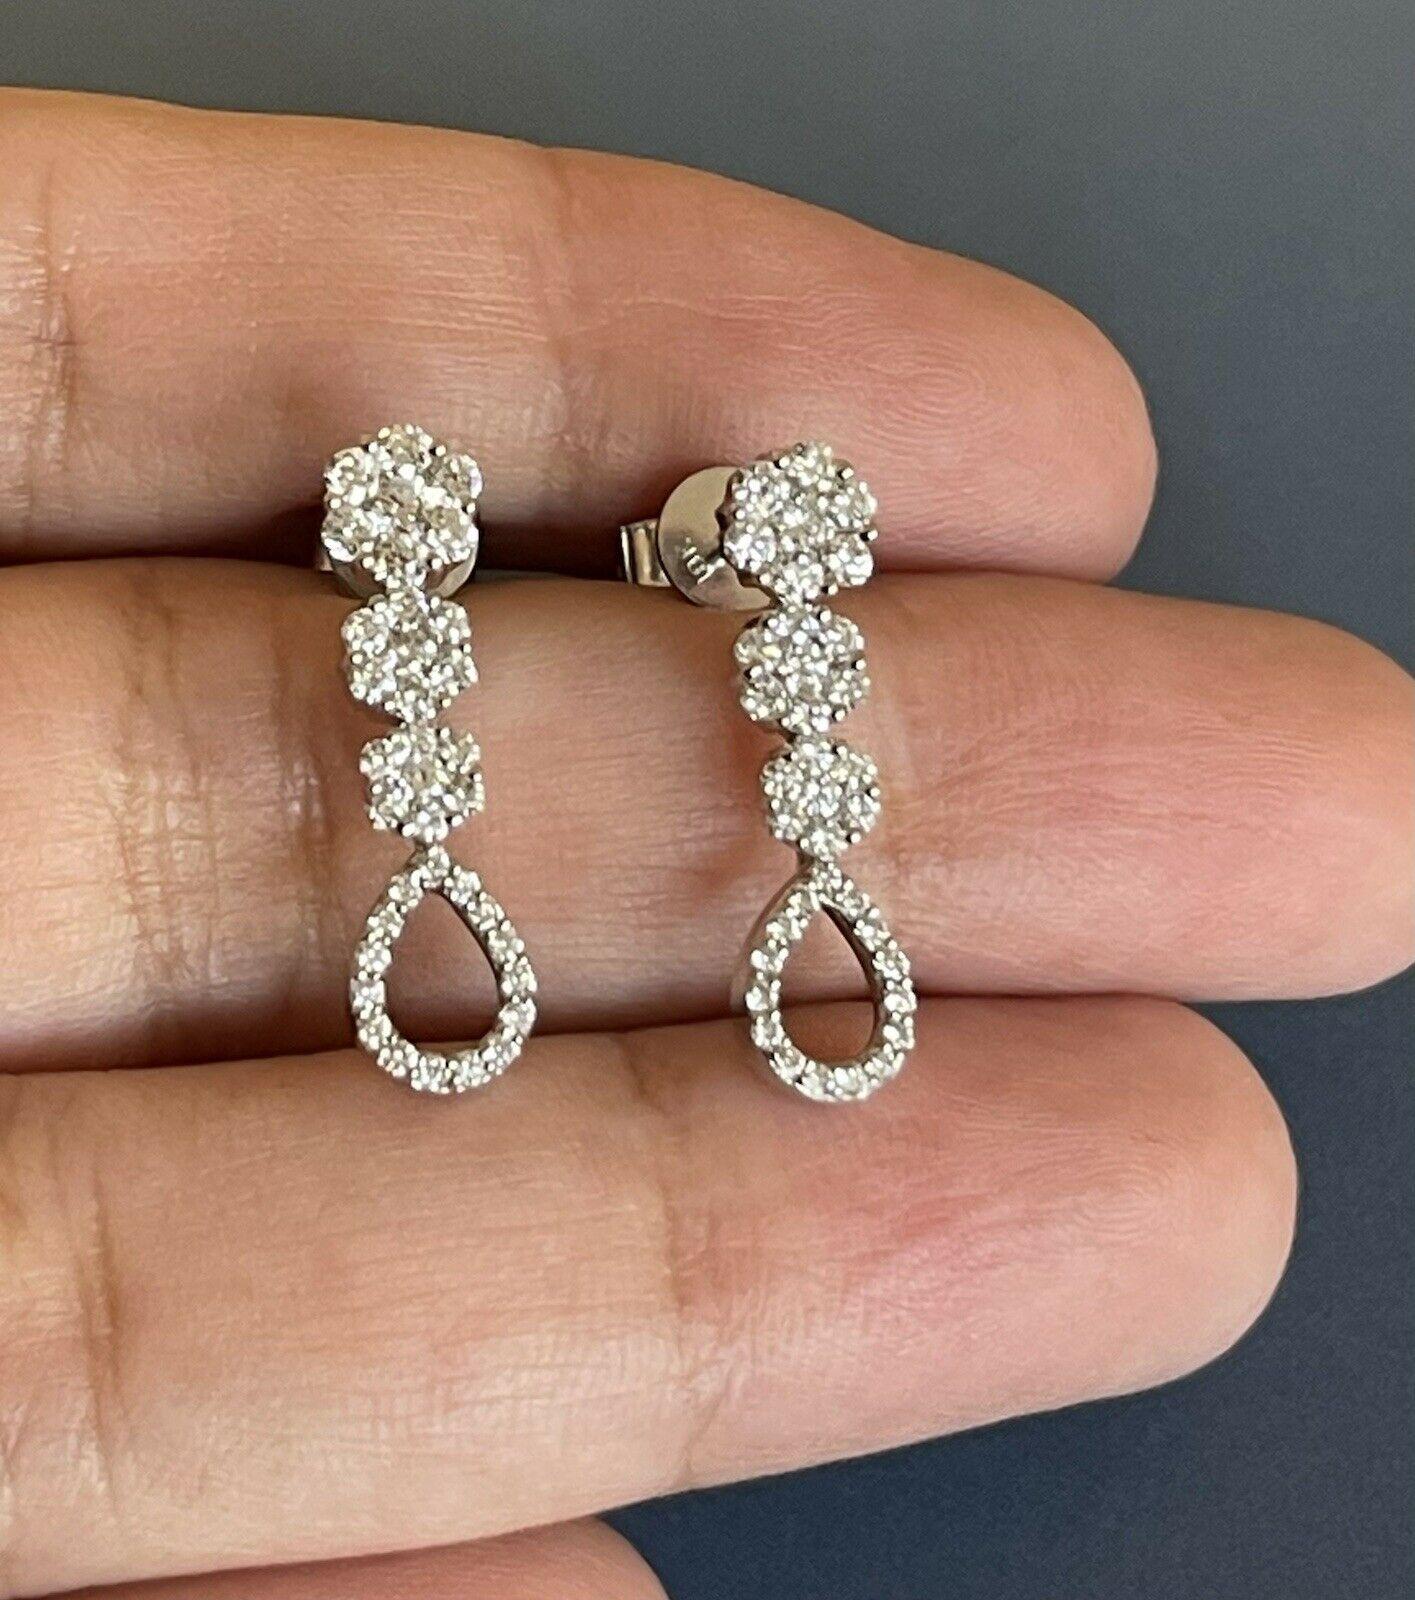 18ct White Gold Diamond Earrings 1.20ct Daisy Drop Cocktail Bridal One Carat For Sale 3